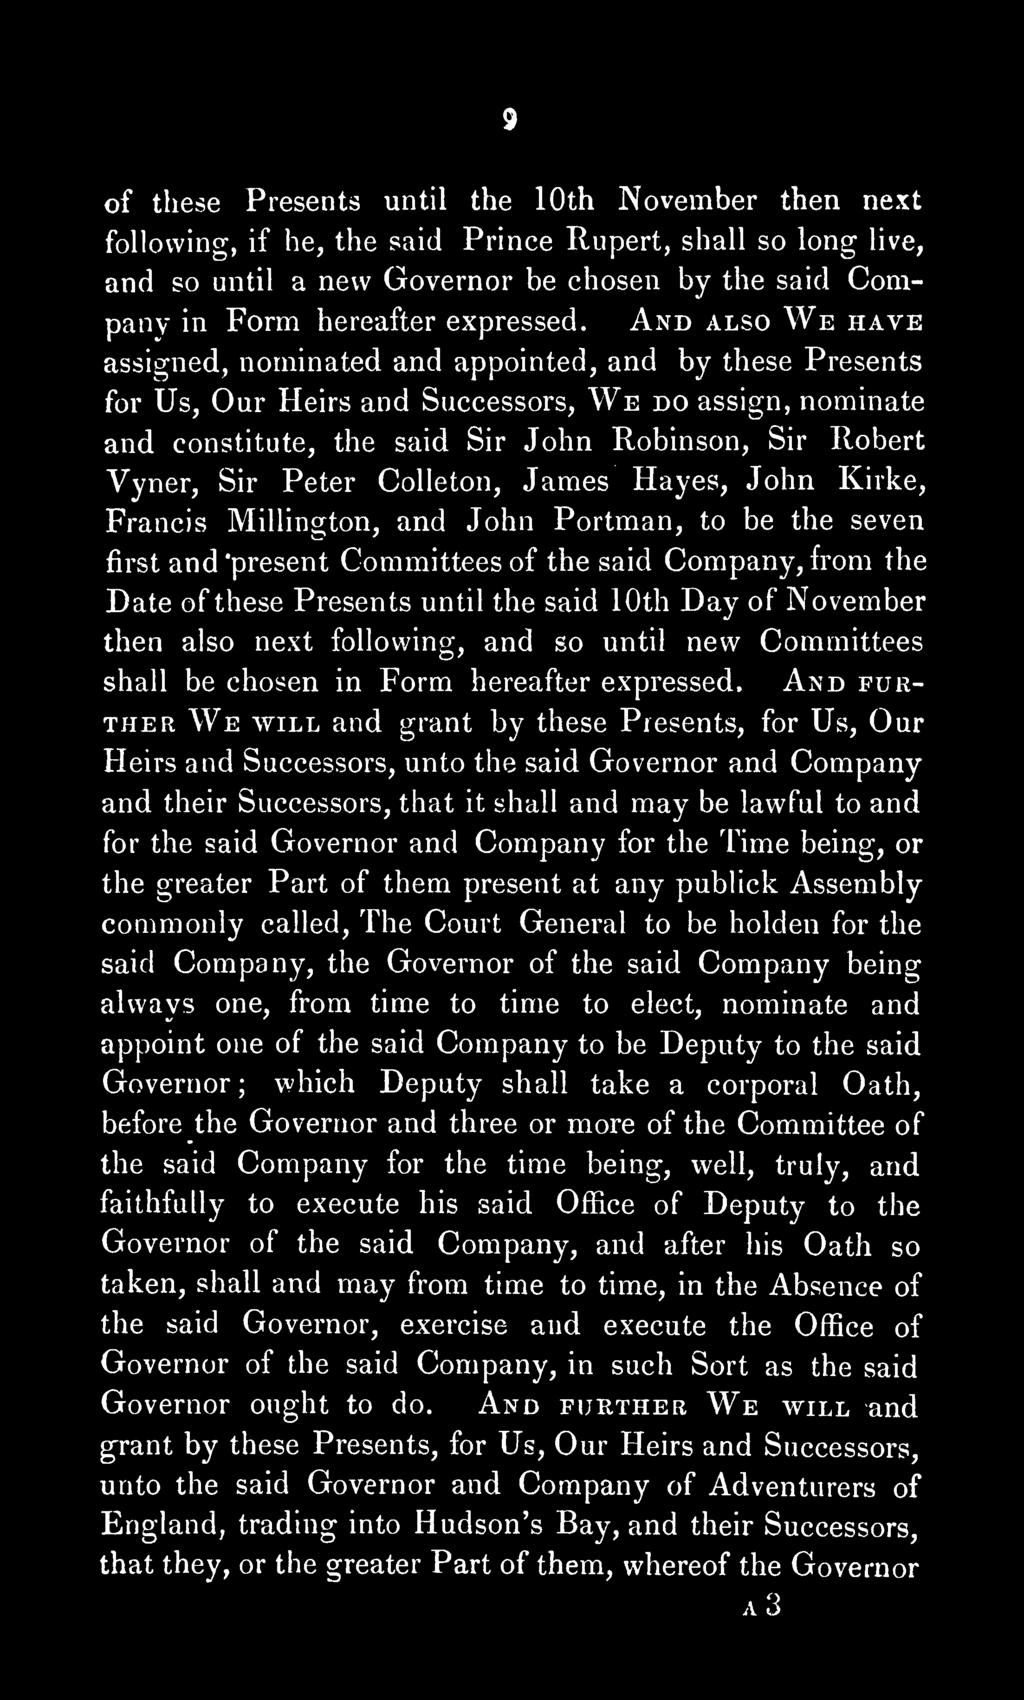 Peter Colleton, James Hayes, John Kirke, Francis Millington, and John Portman, to be the seven first and 'present Committees of the said Company, from the Date of these Presents until the said 10th